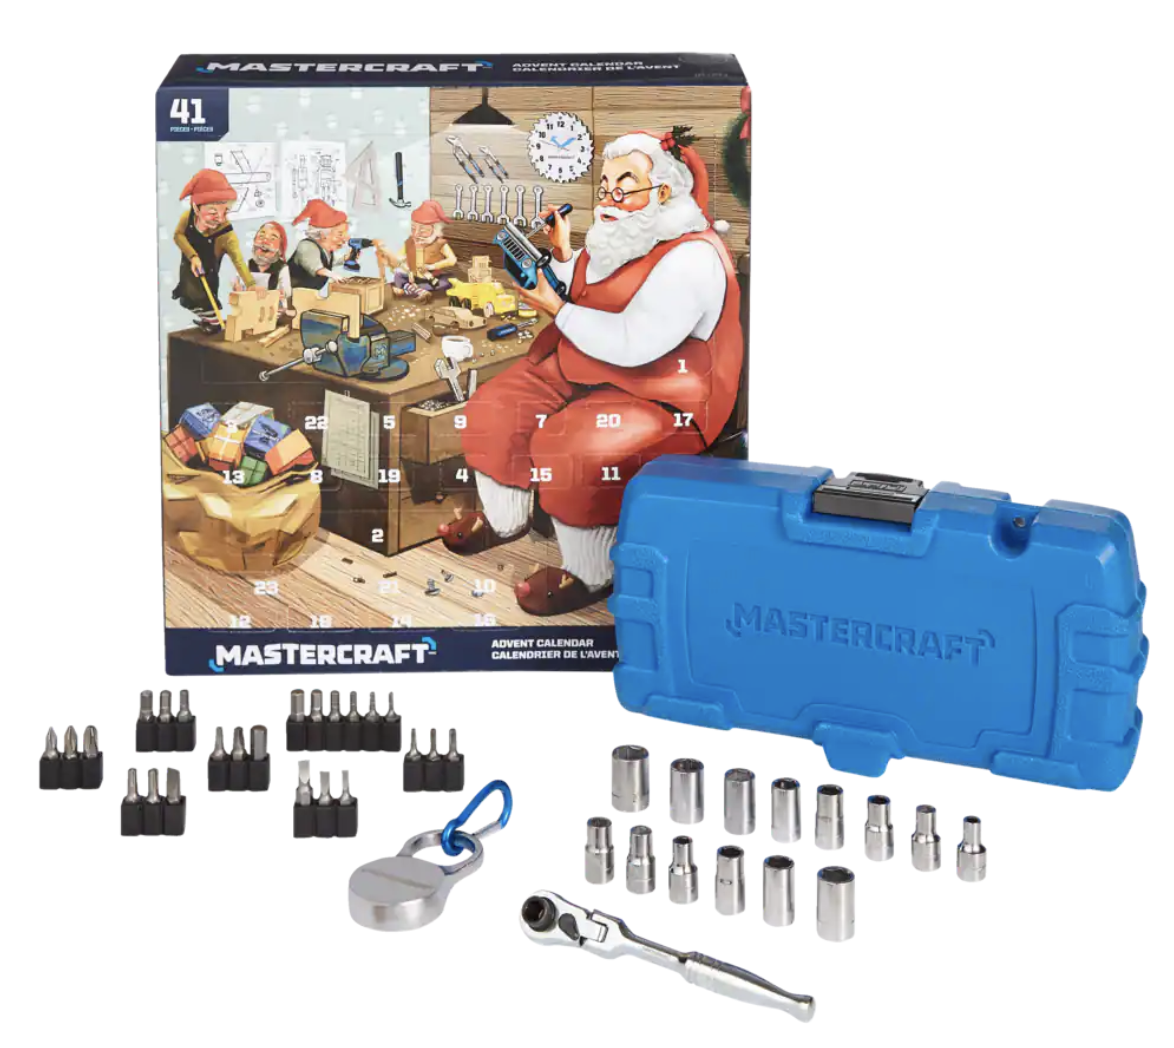 the tools in front of the advent calendar box